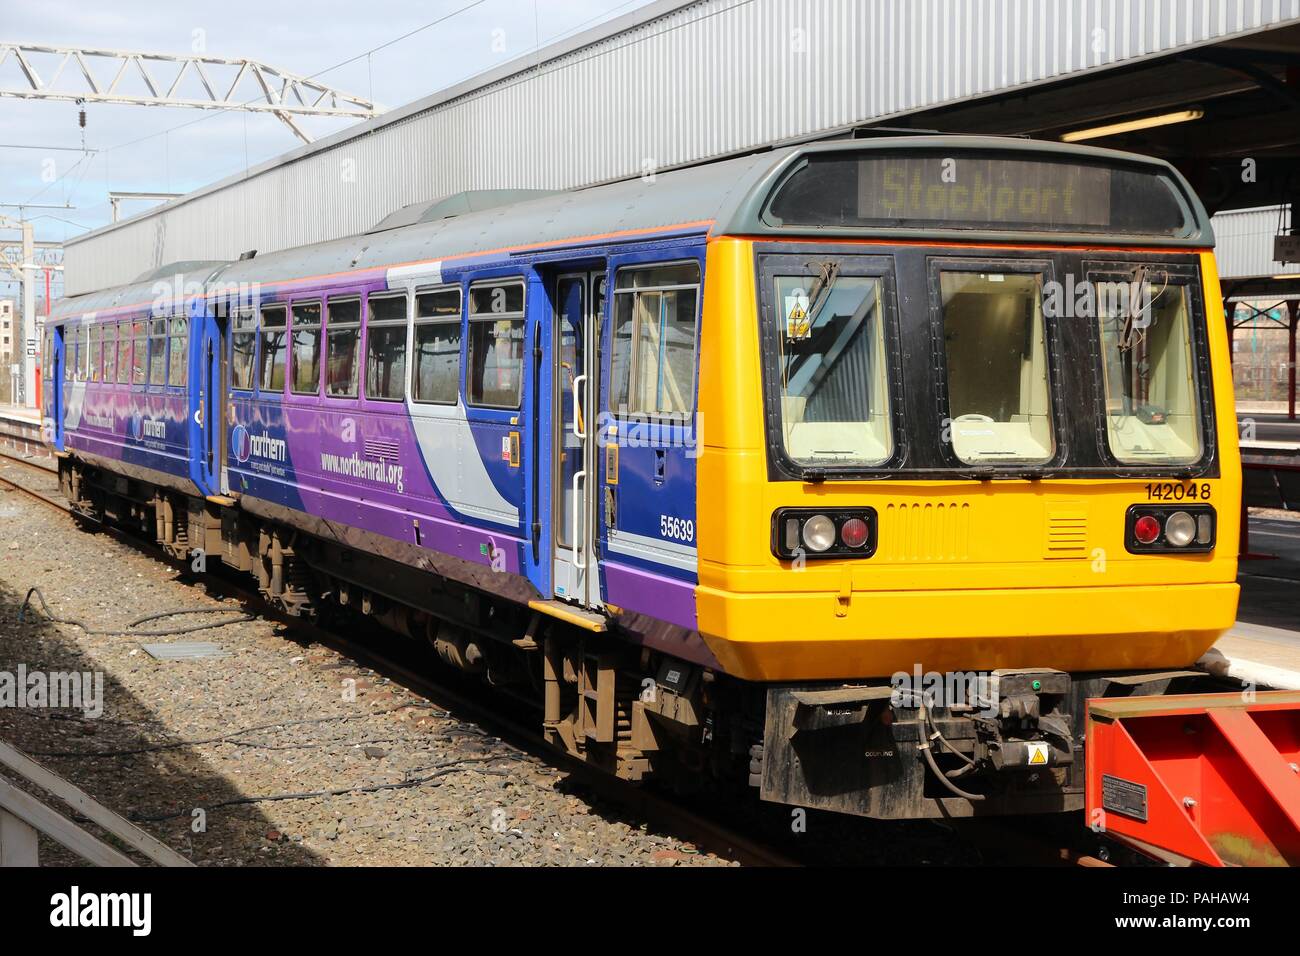 STOCKPORT, UK - APRIL 23: Northern Rail train on April 23, 2013 in Stockport, UK. NR is part of Serco-Abellio joint venture. NR has fleet of 313 train Stock Photo